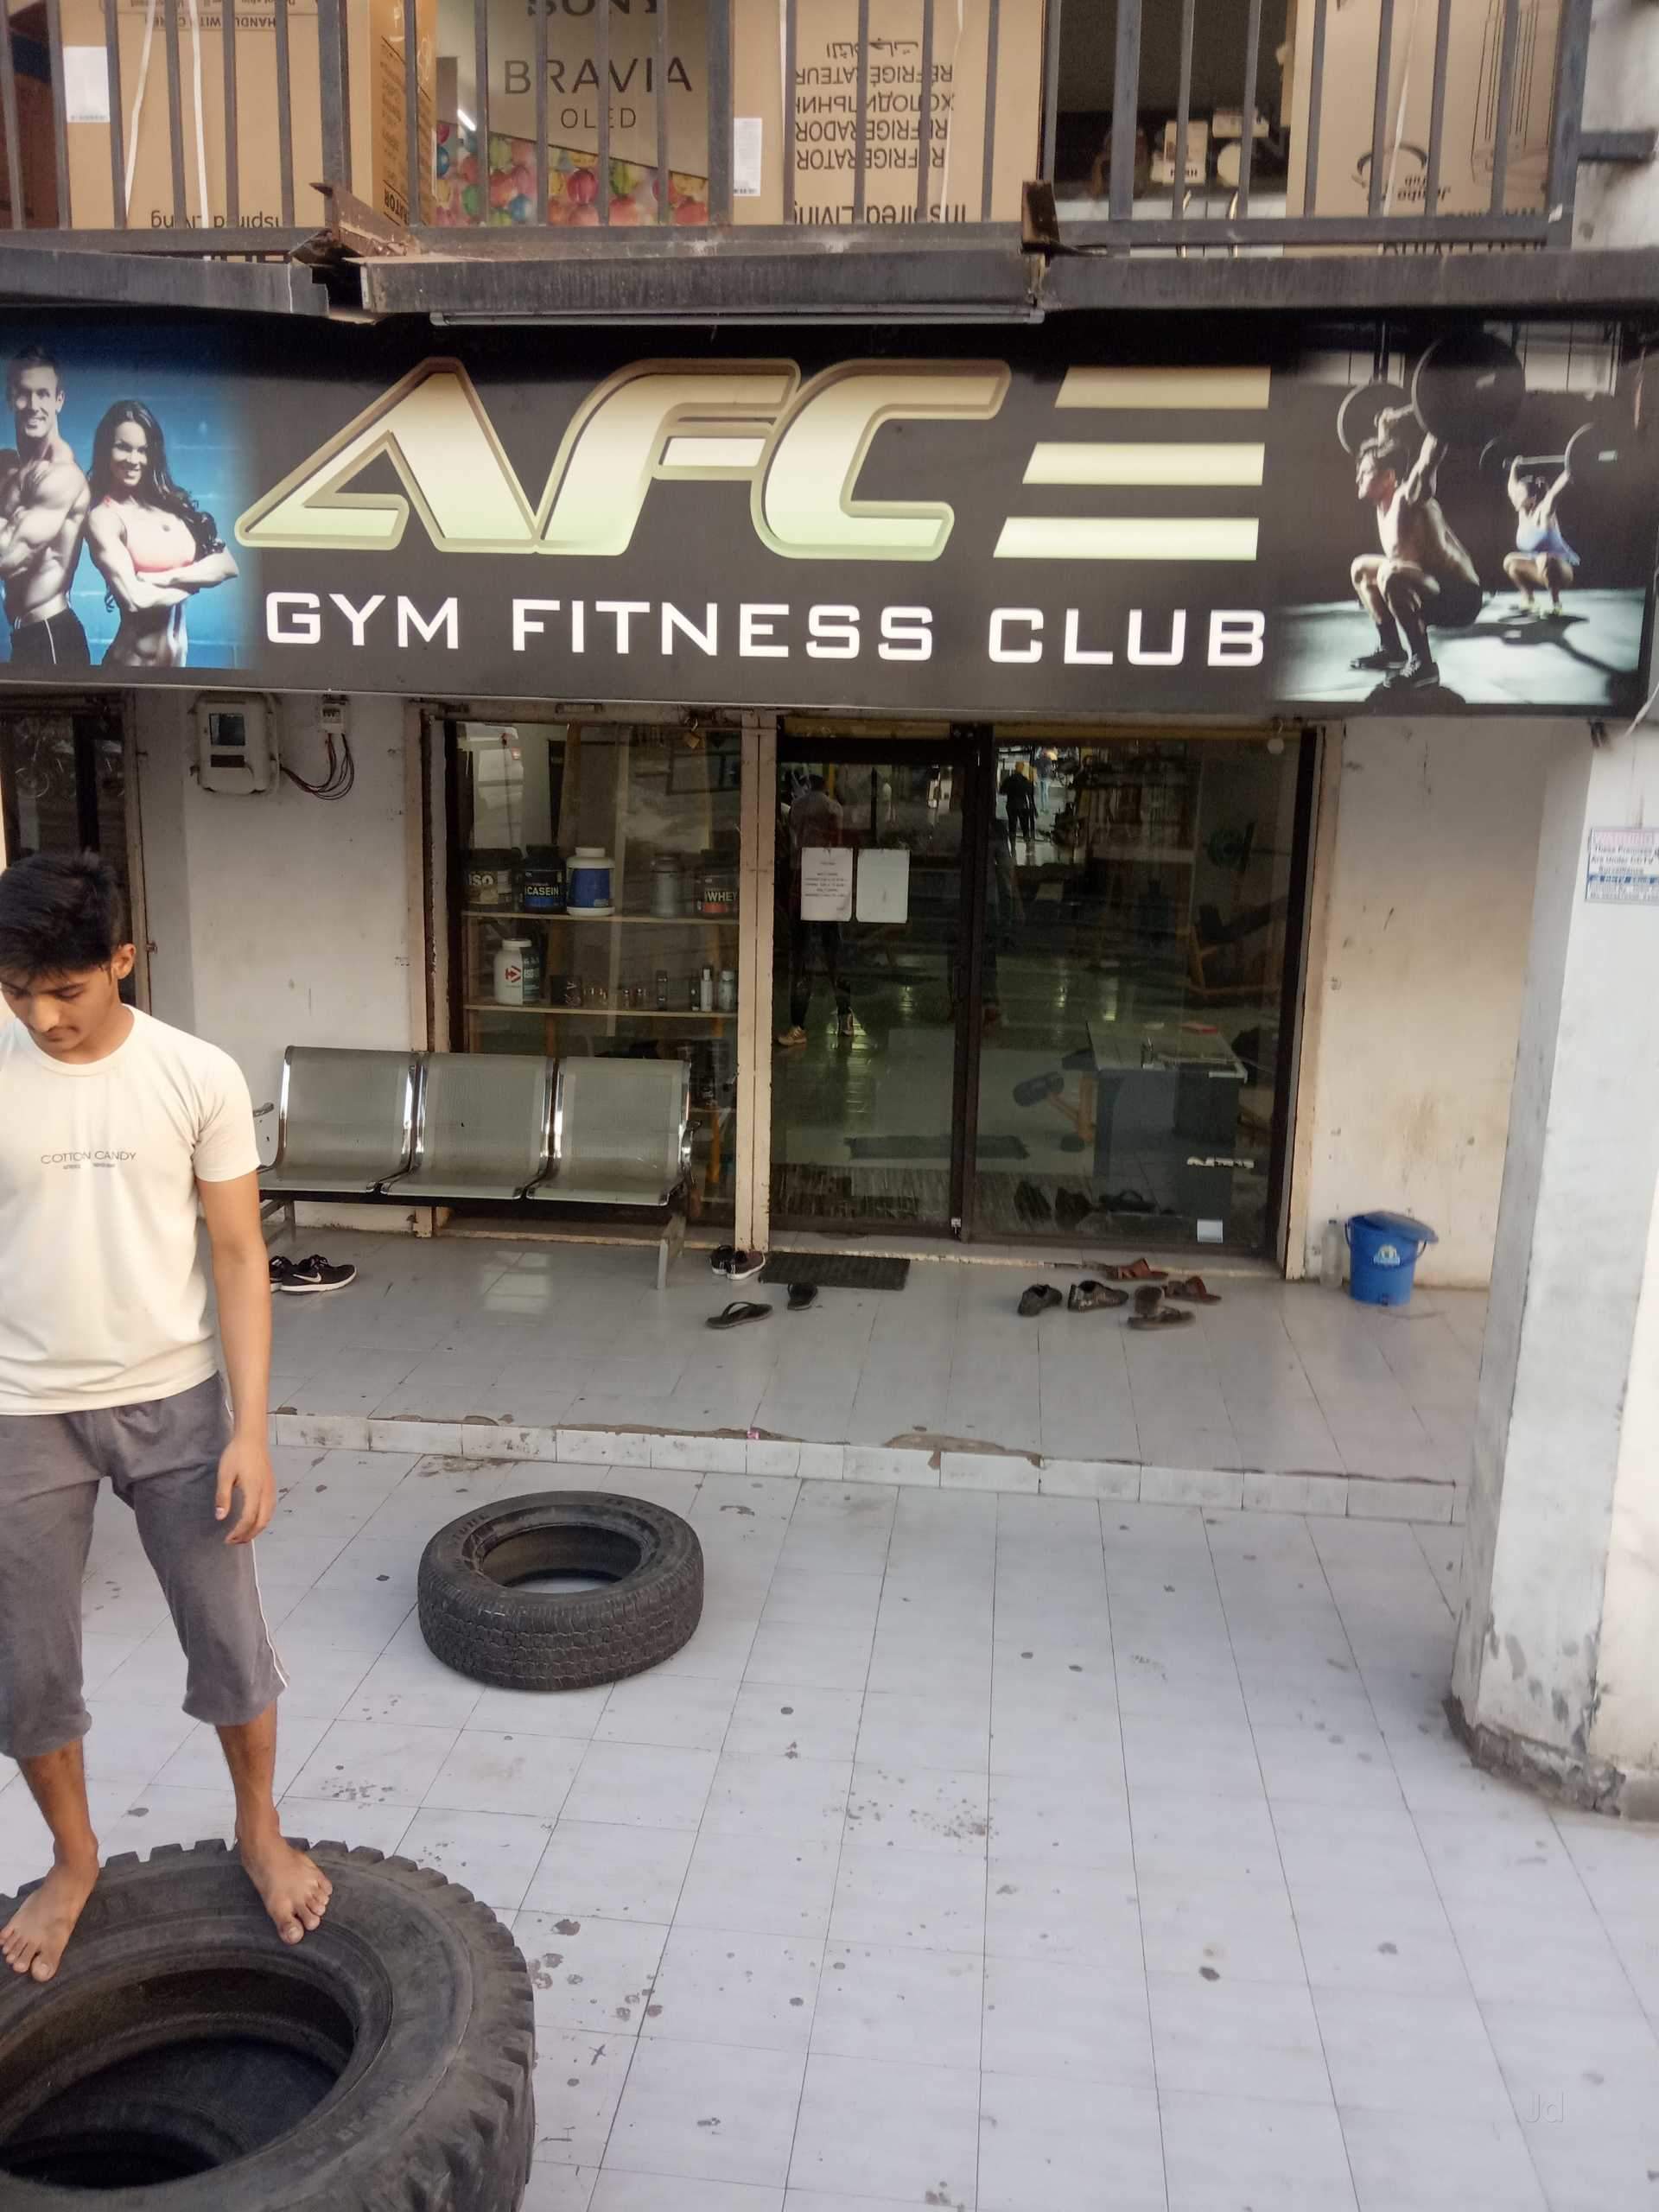 Bharuch-Dahej-Bypass-Road-Afce-Gym_81_ODE